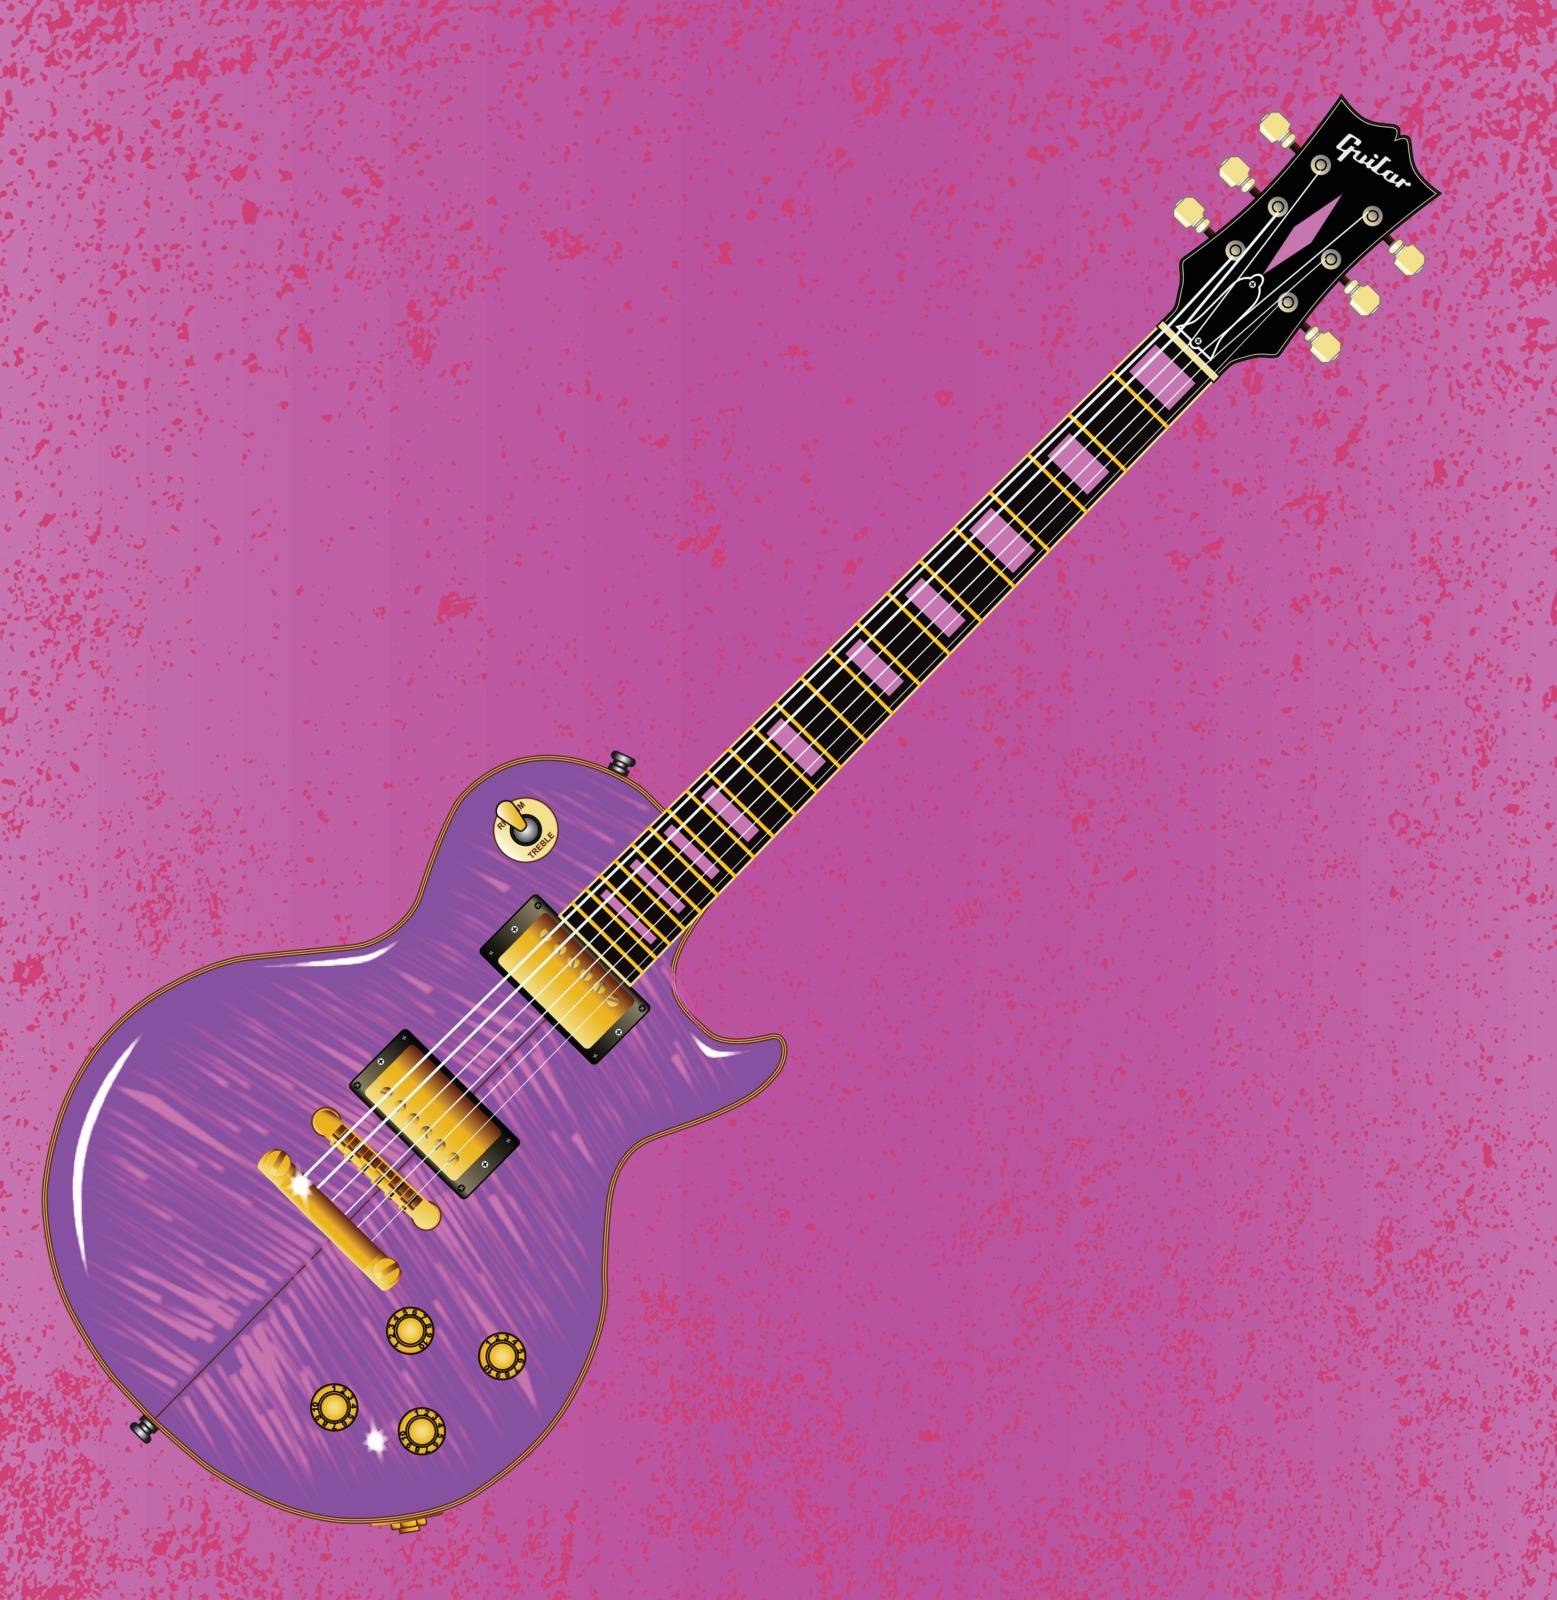 A pink feline electric guitar with grunge style background